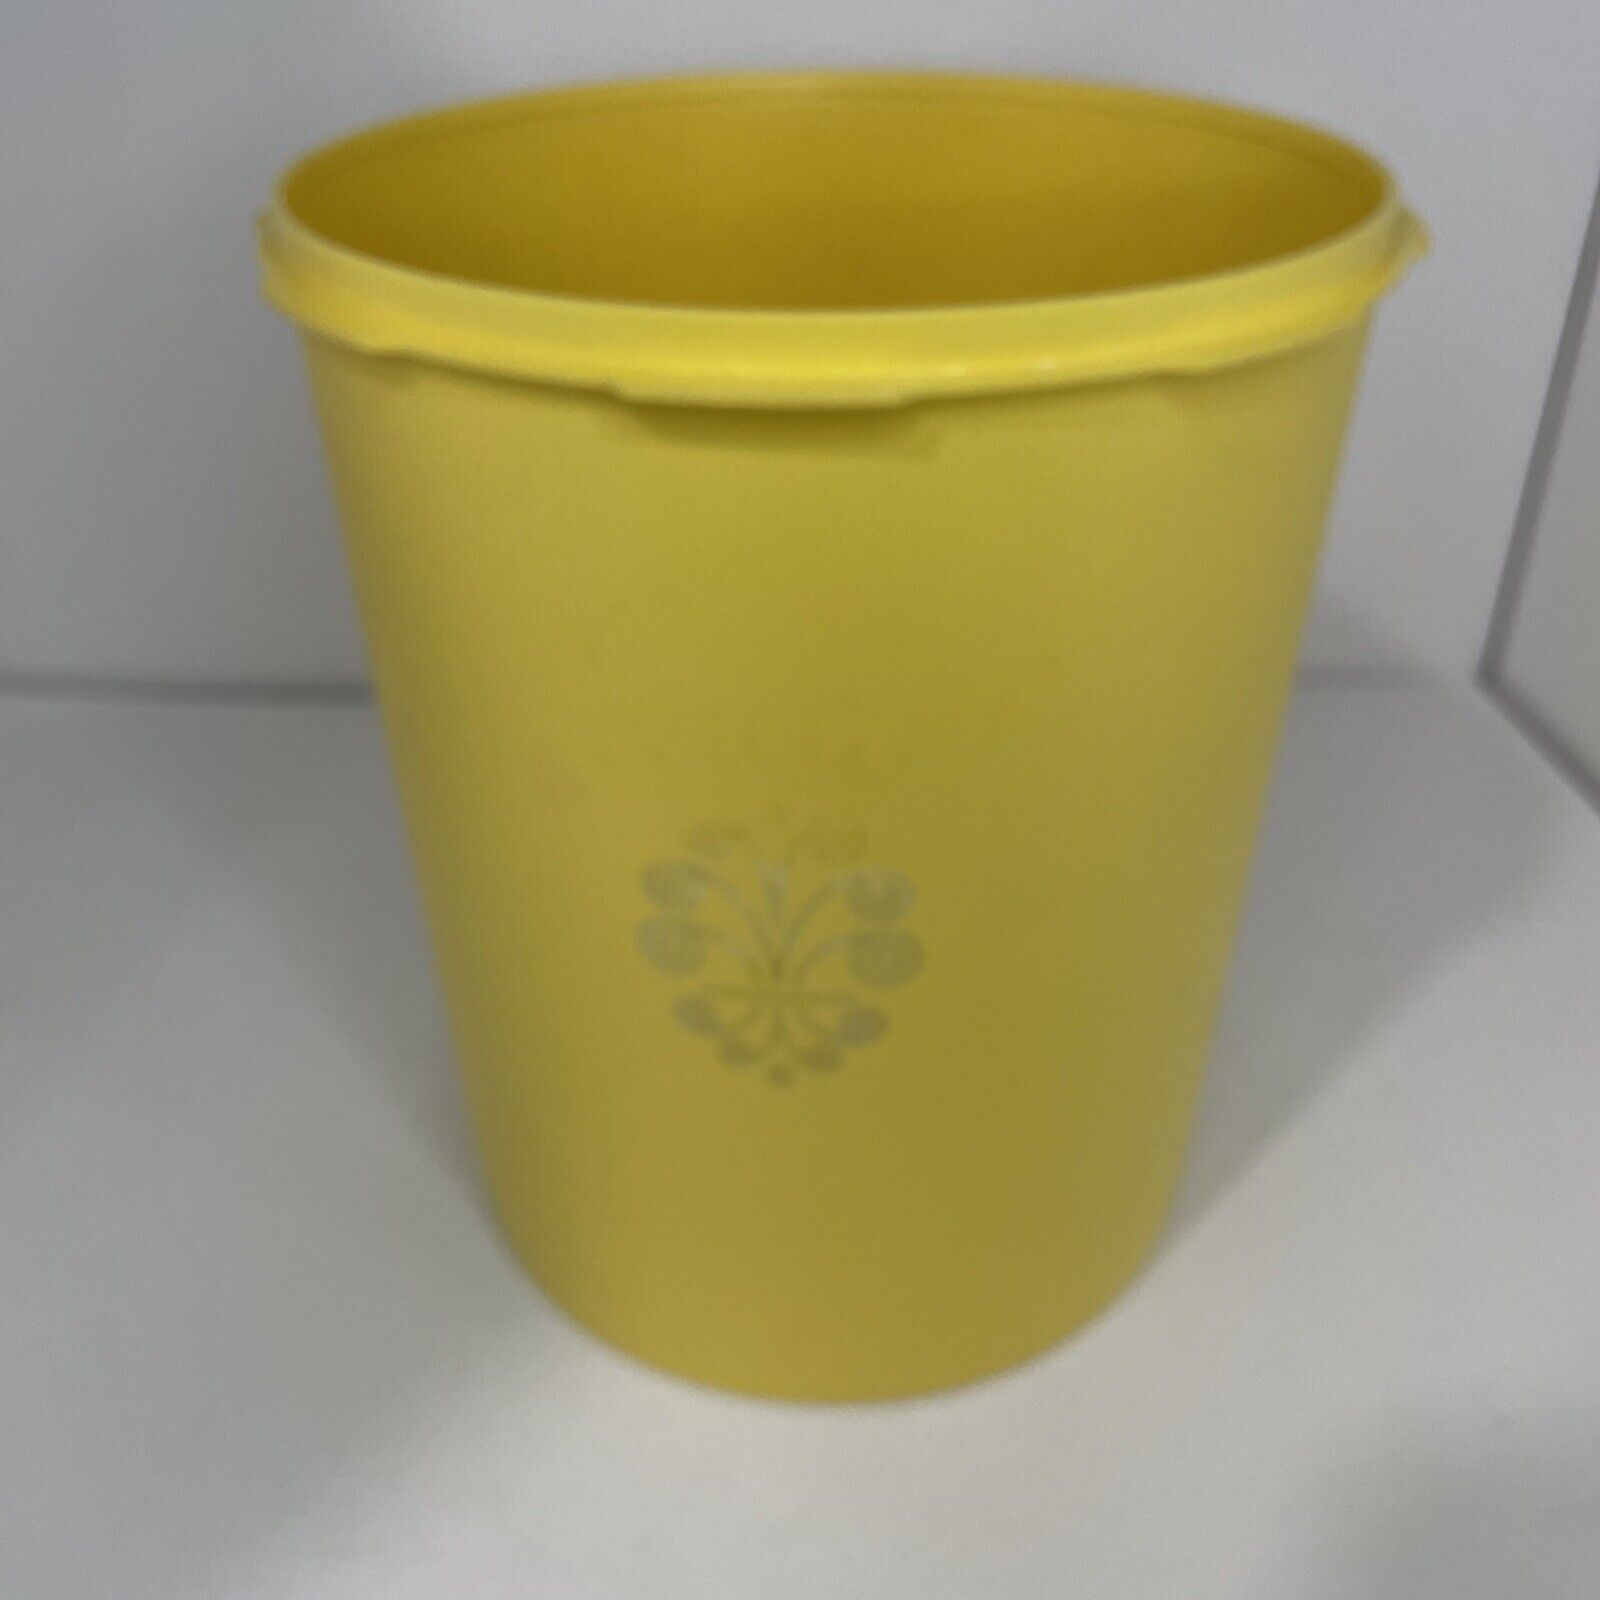 VINTAGE TUPPERWARE #805-5 CANISTER SUNBURST YELLOW (NO LID) MADE IN USA